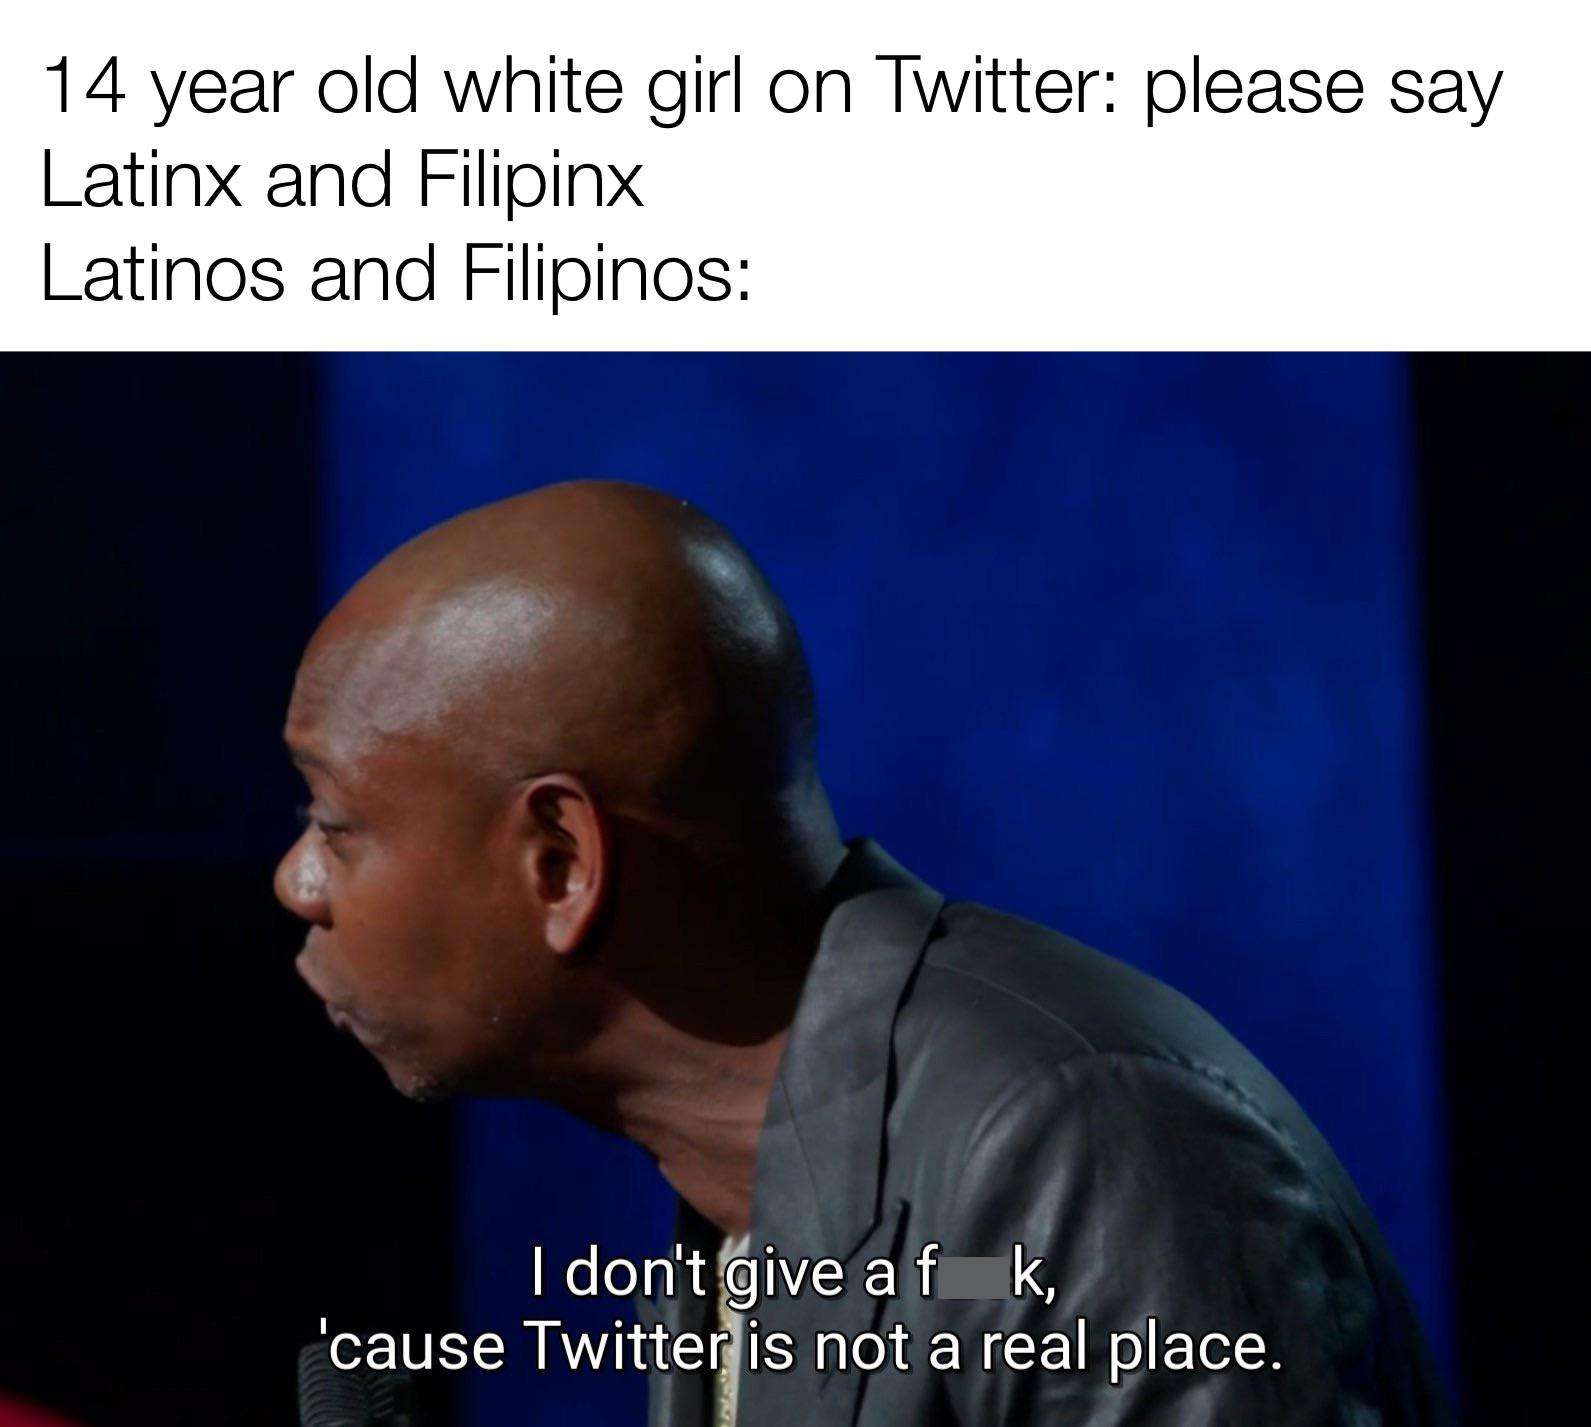 twitter is not a real place dave - 14 year old white girl on Twitter please say Latinx and Filipinx Latinos and Filipinos I don't give a fk, 'cause Twitter is not a real place.